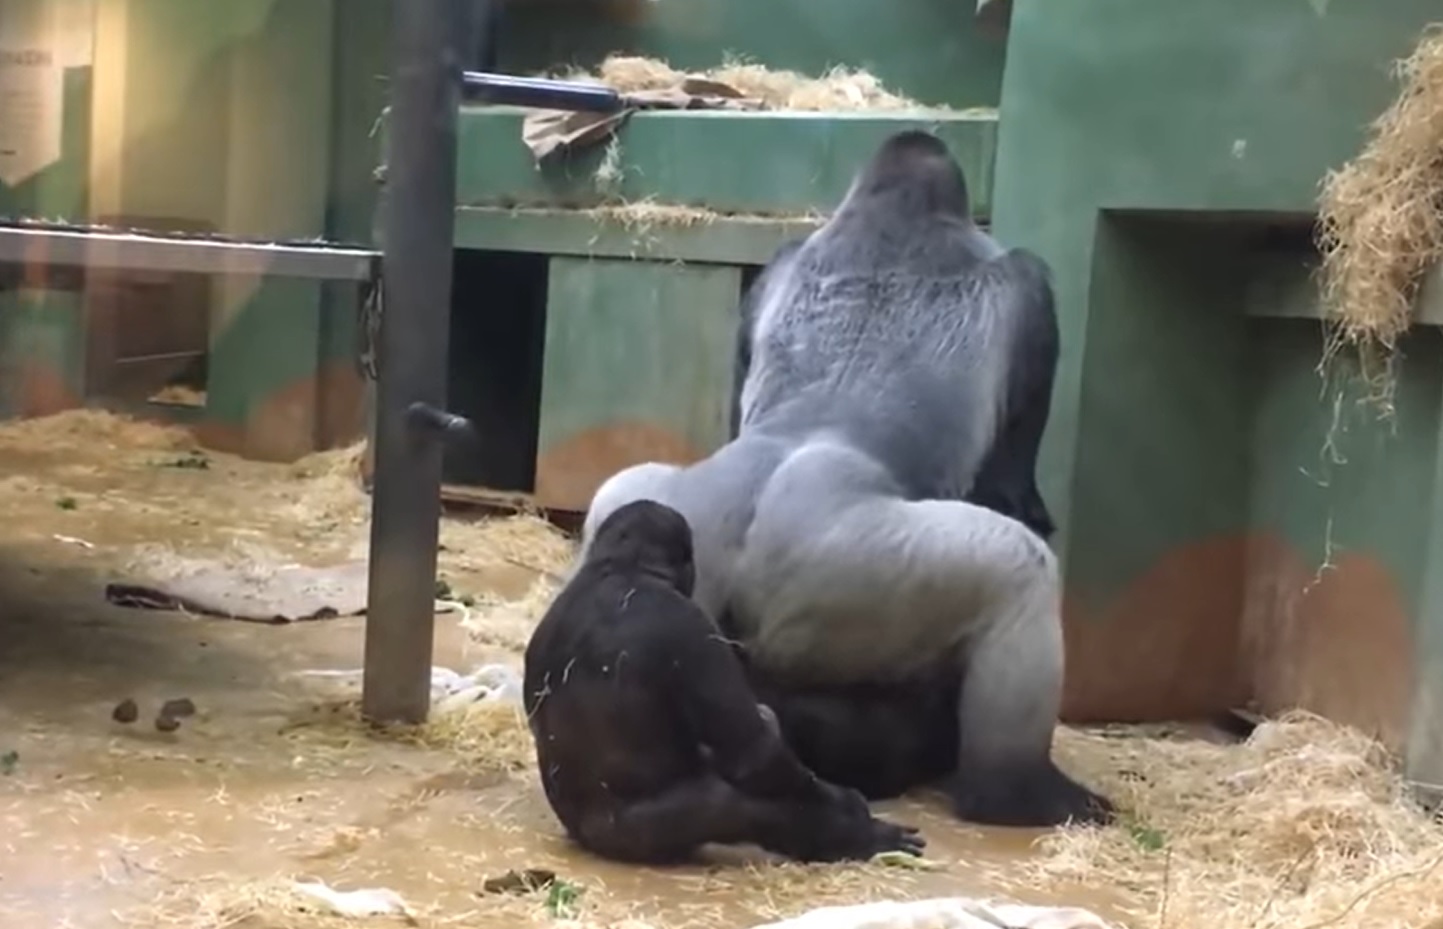 Bokep Gorilla - Parents in shock as gorillas mate in front of kids at zoo